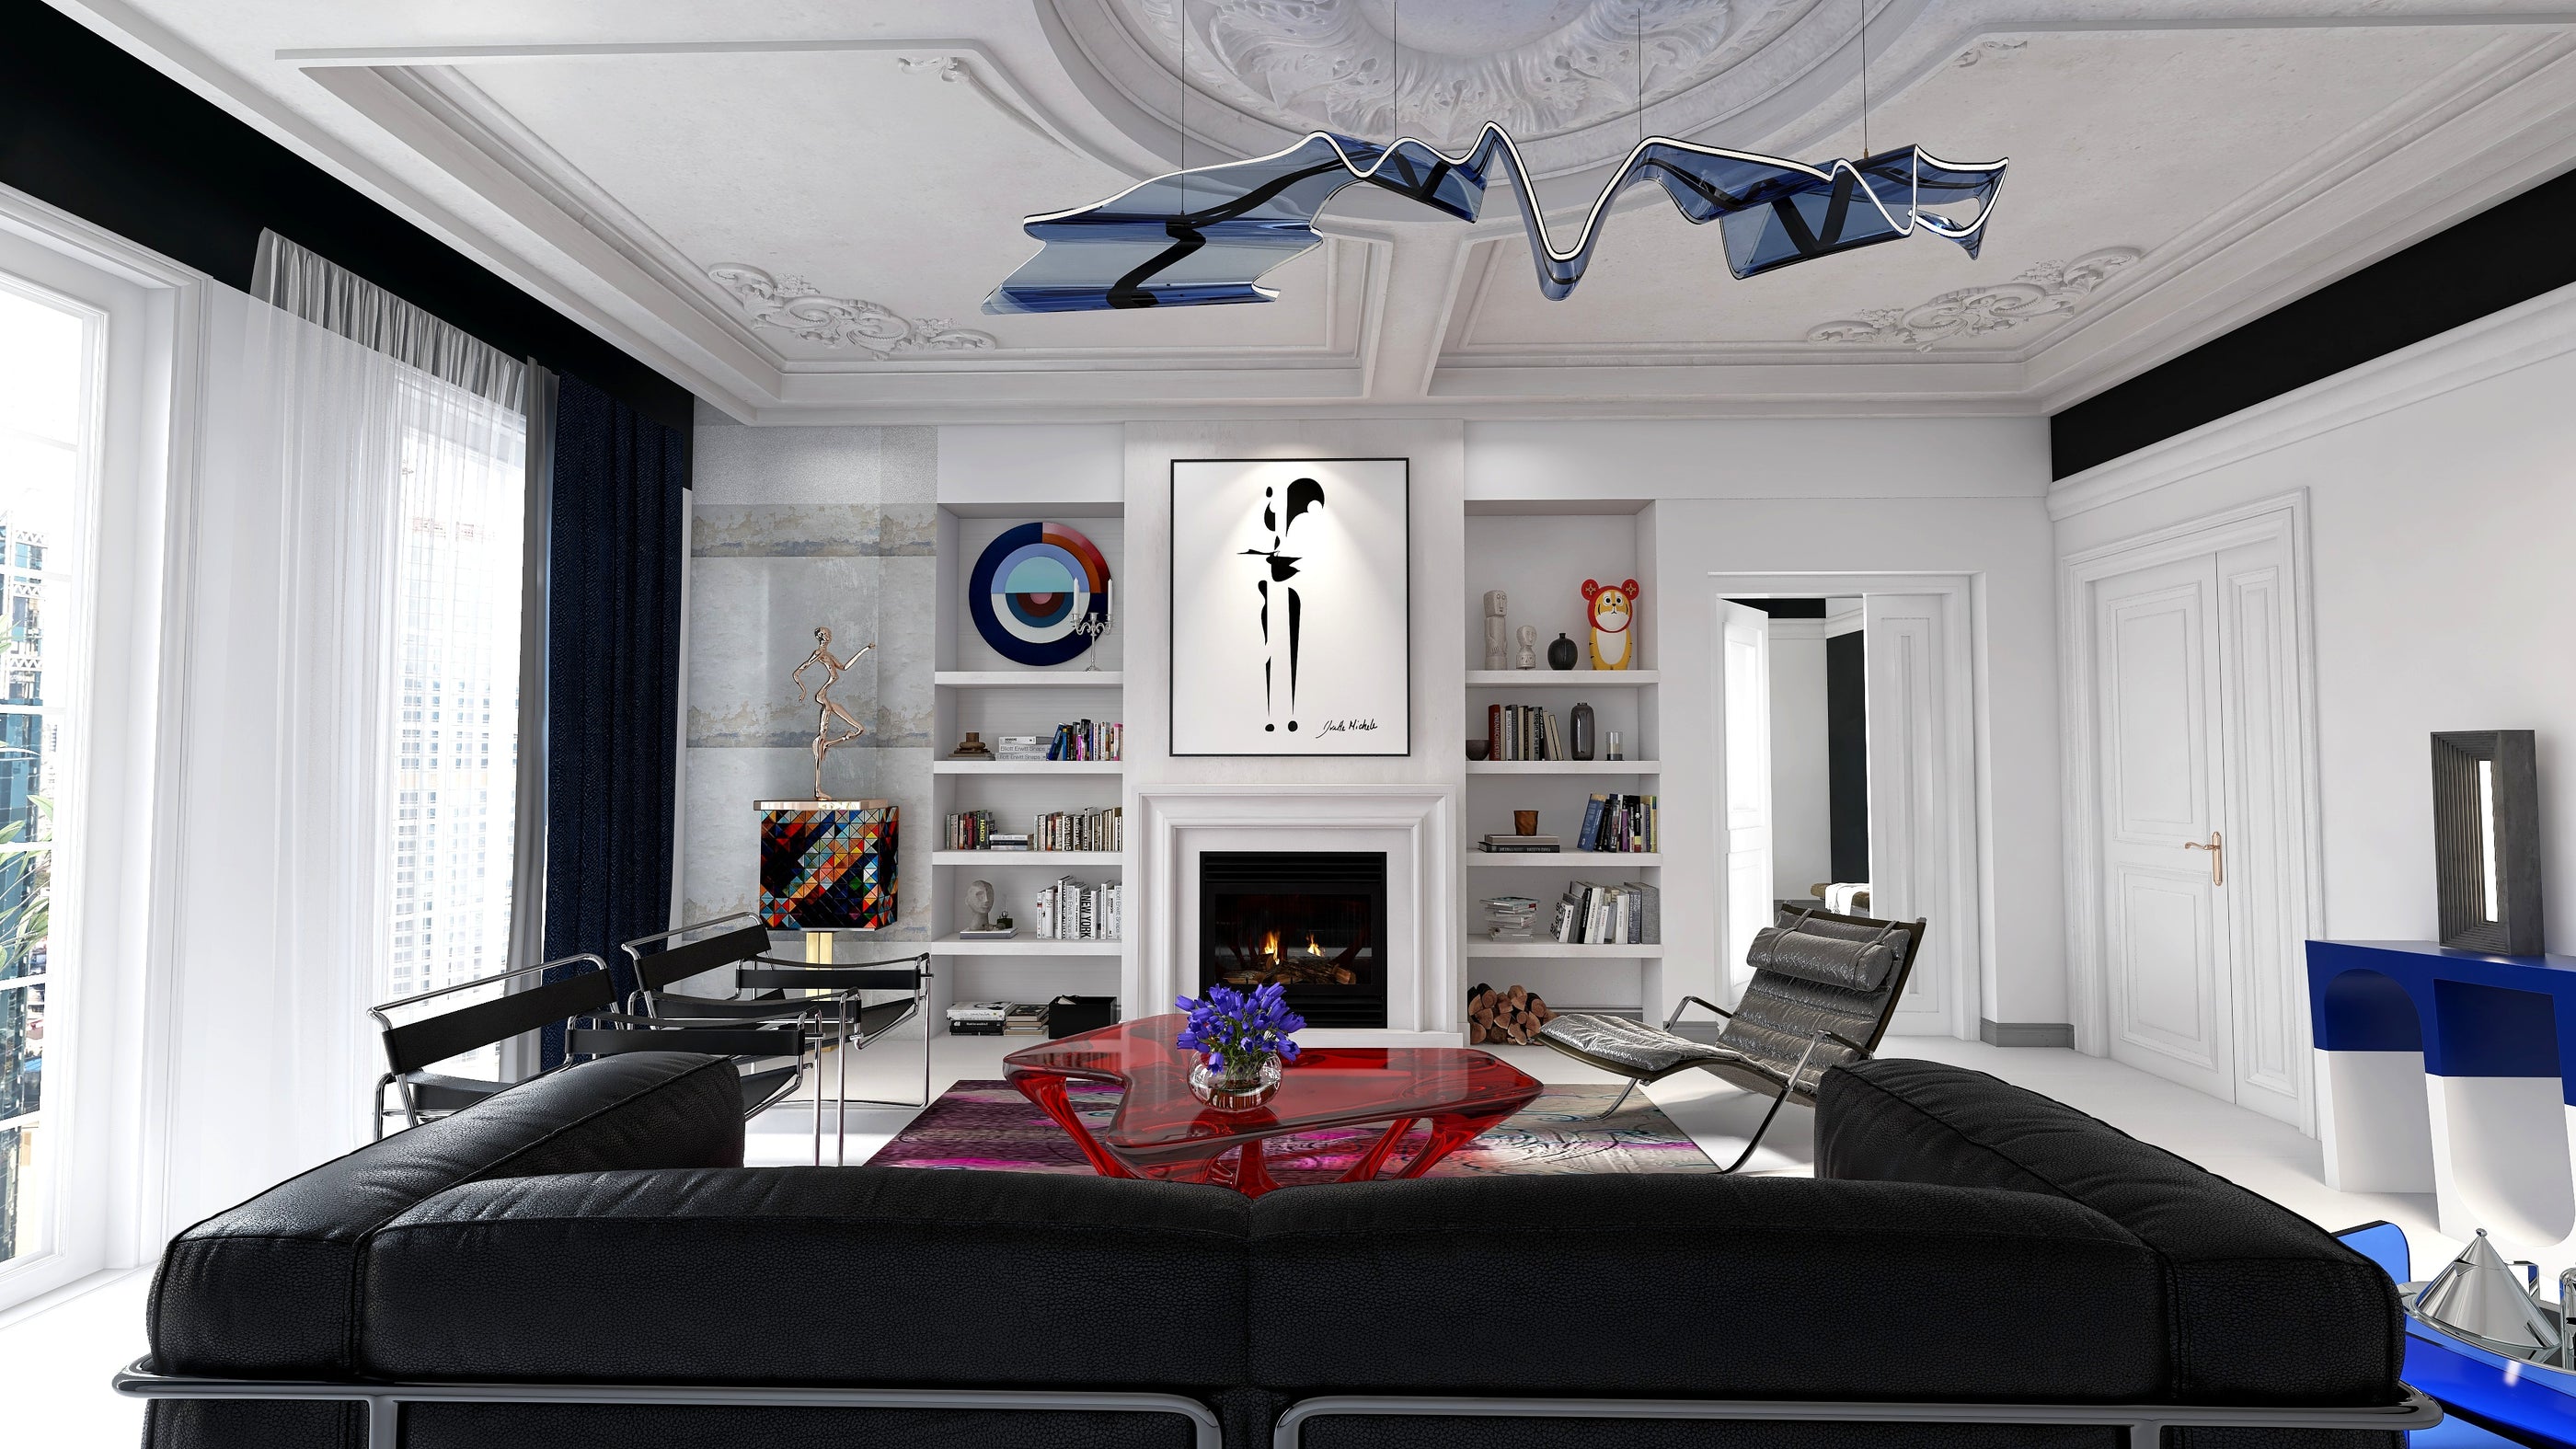 Black and White abstract art in a modern interior design